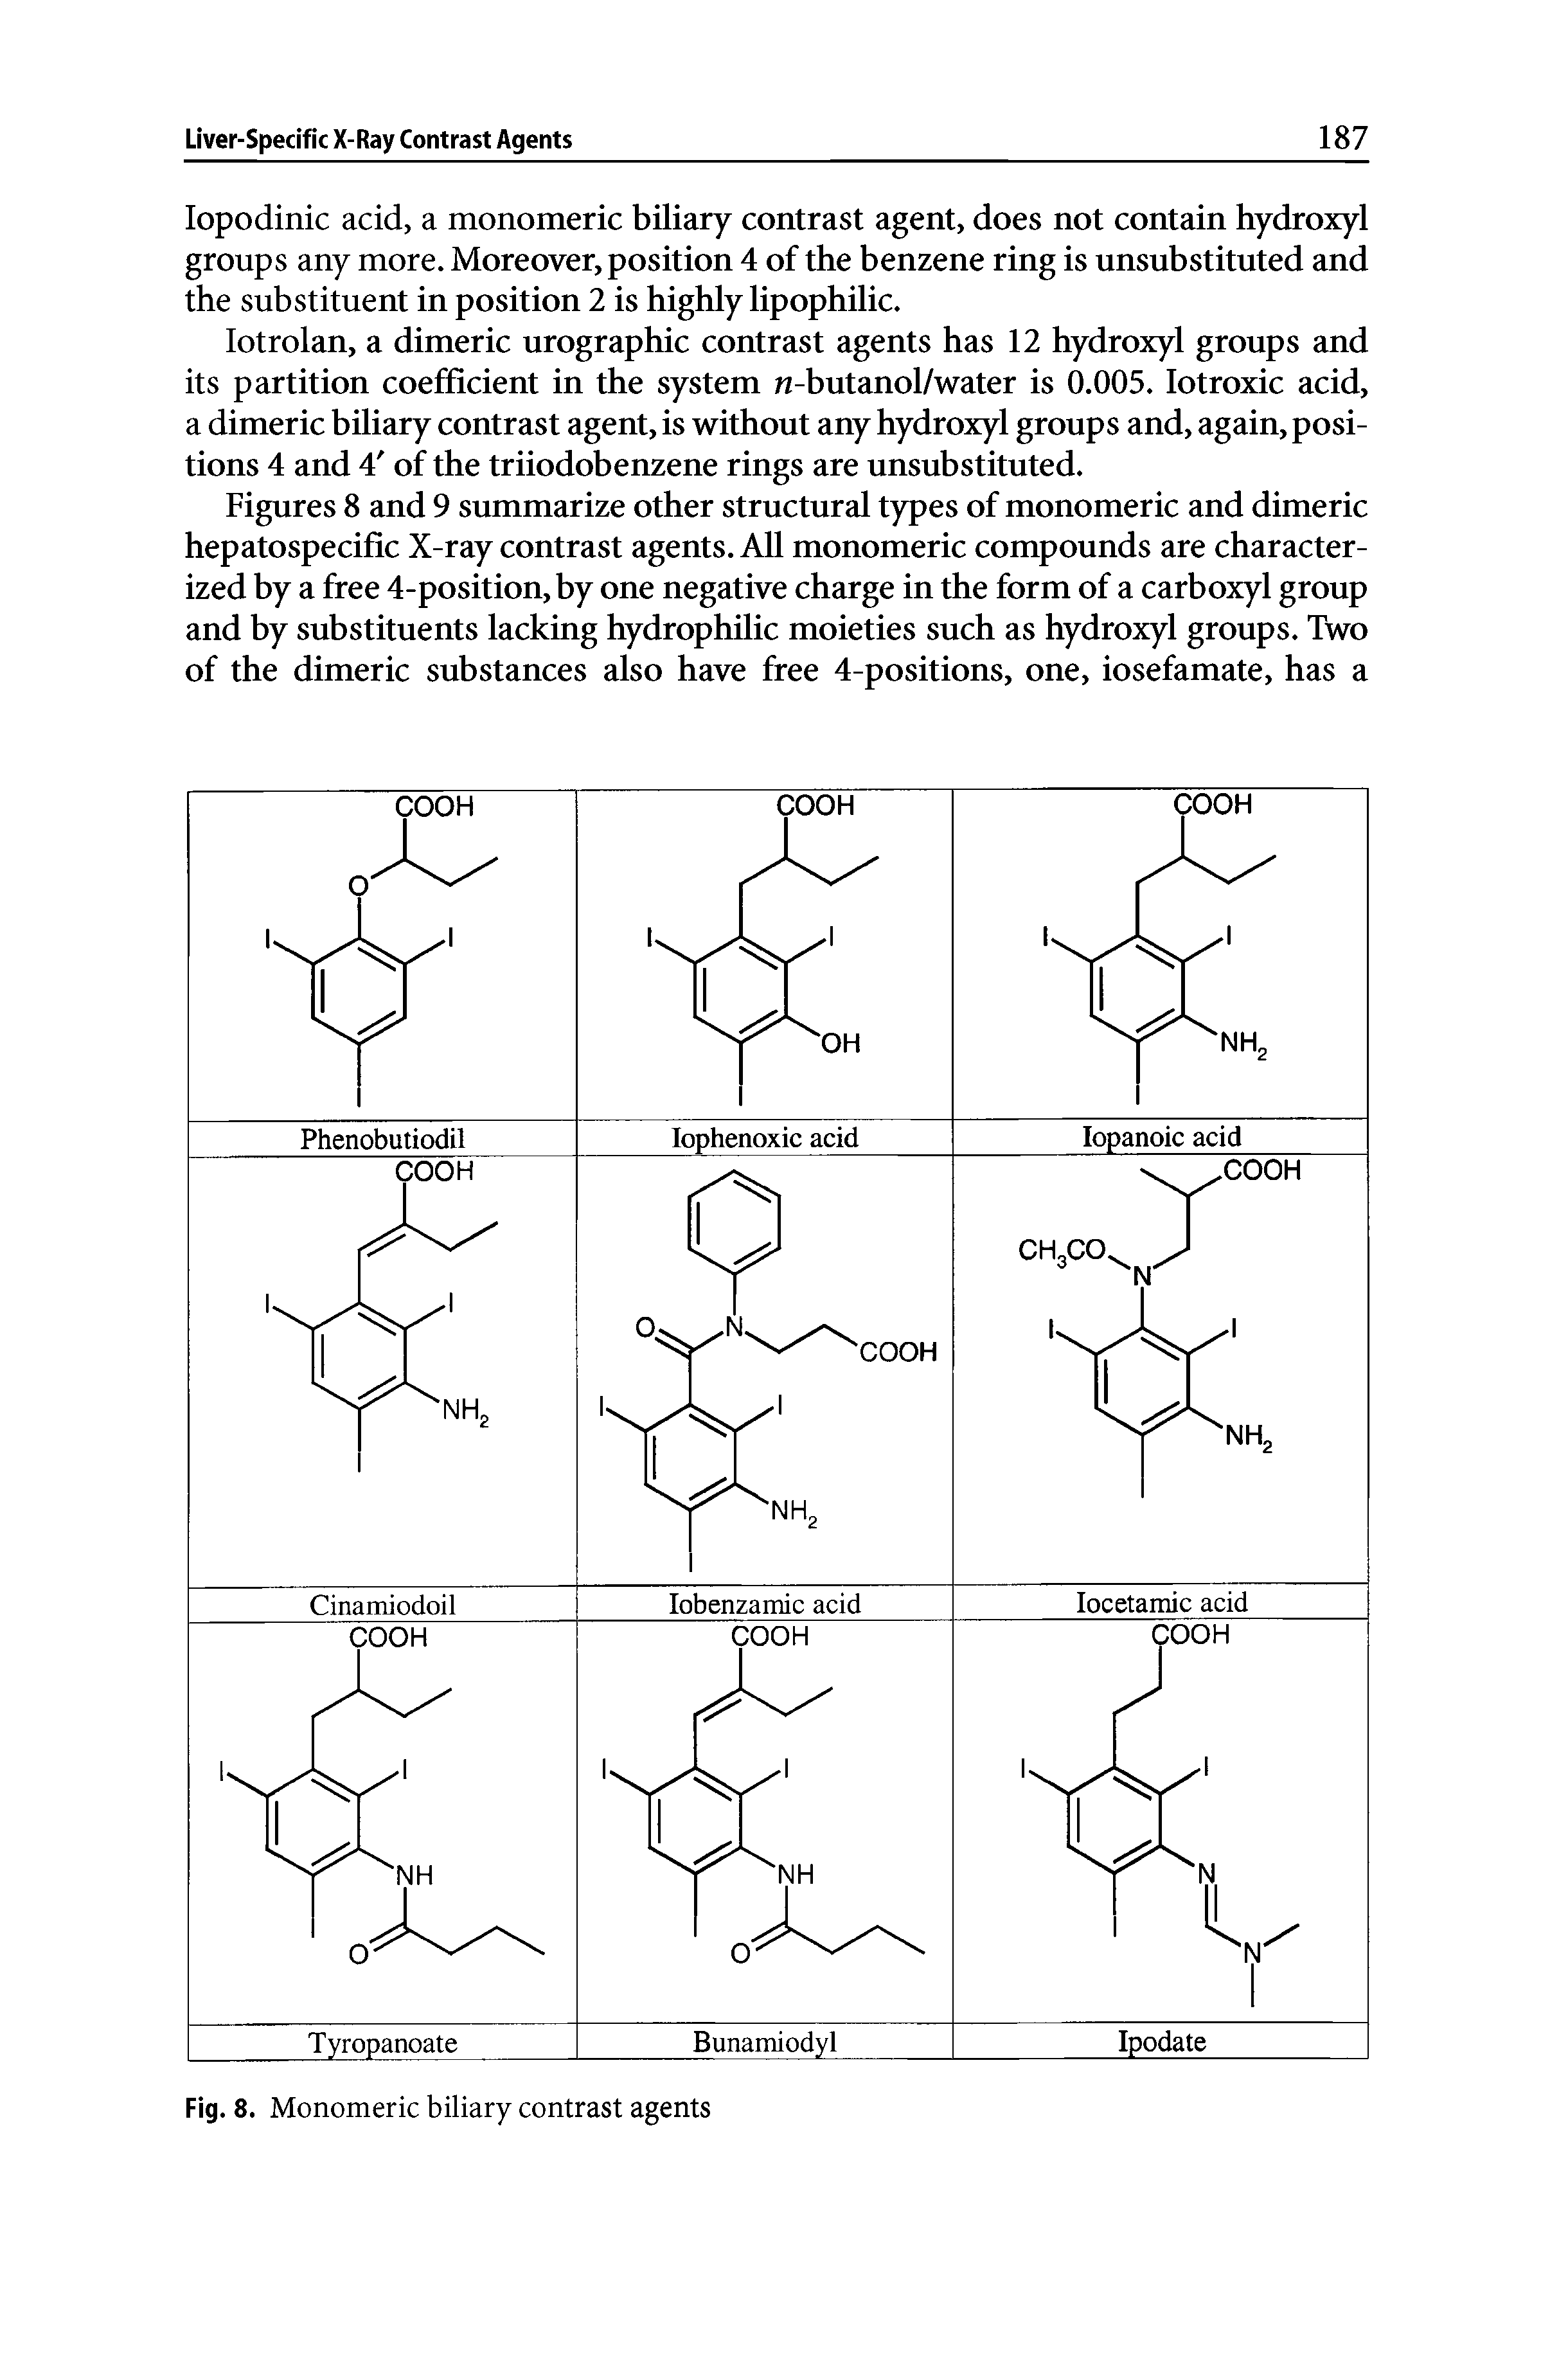 Figures 8 and 9 summarize other structural types of monomeric and dimeric hepatospecific X-ray contrast agents. All monomeric compounds are characterized by a free 4-position, by one negative charge in the form of a carboxyl group and by substituents lacking hydrophilic moieties such as hydroxyl groups. Two of the dimeric substances also have free 4-positions, one, iosefamate, has a...